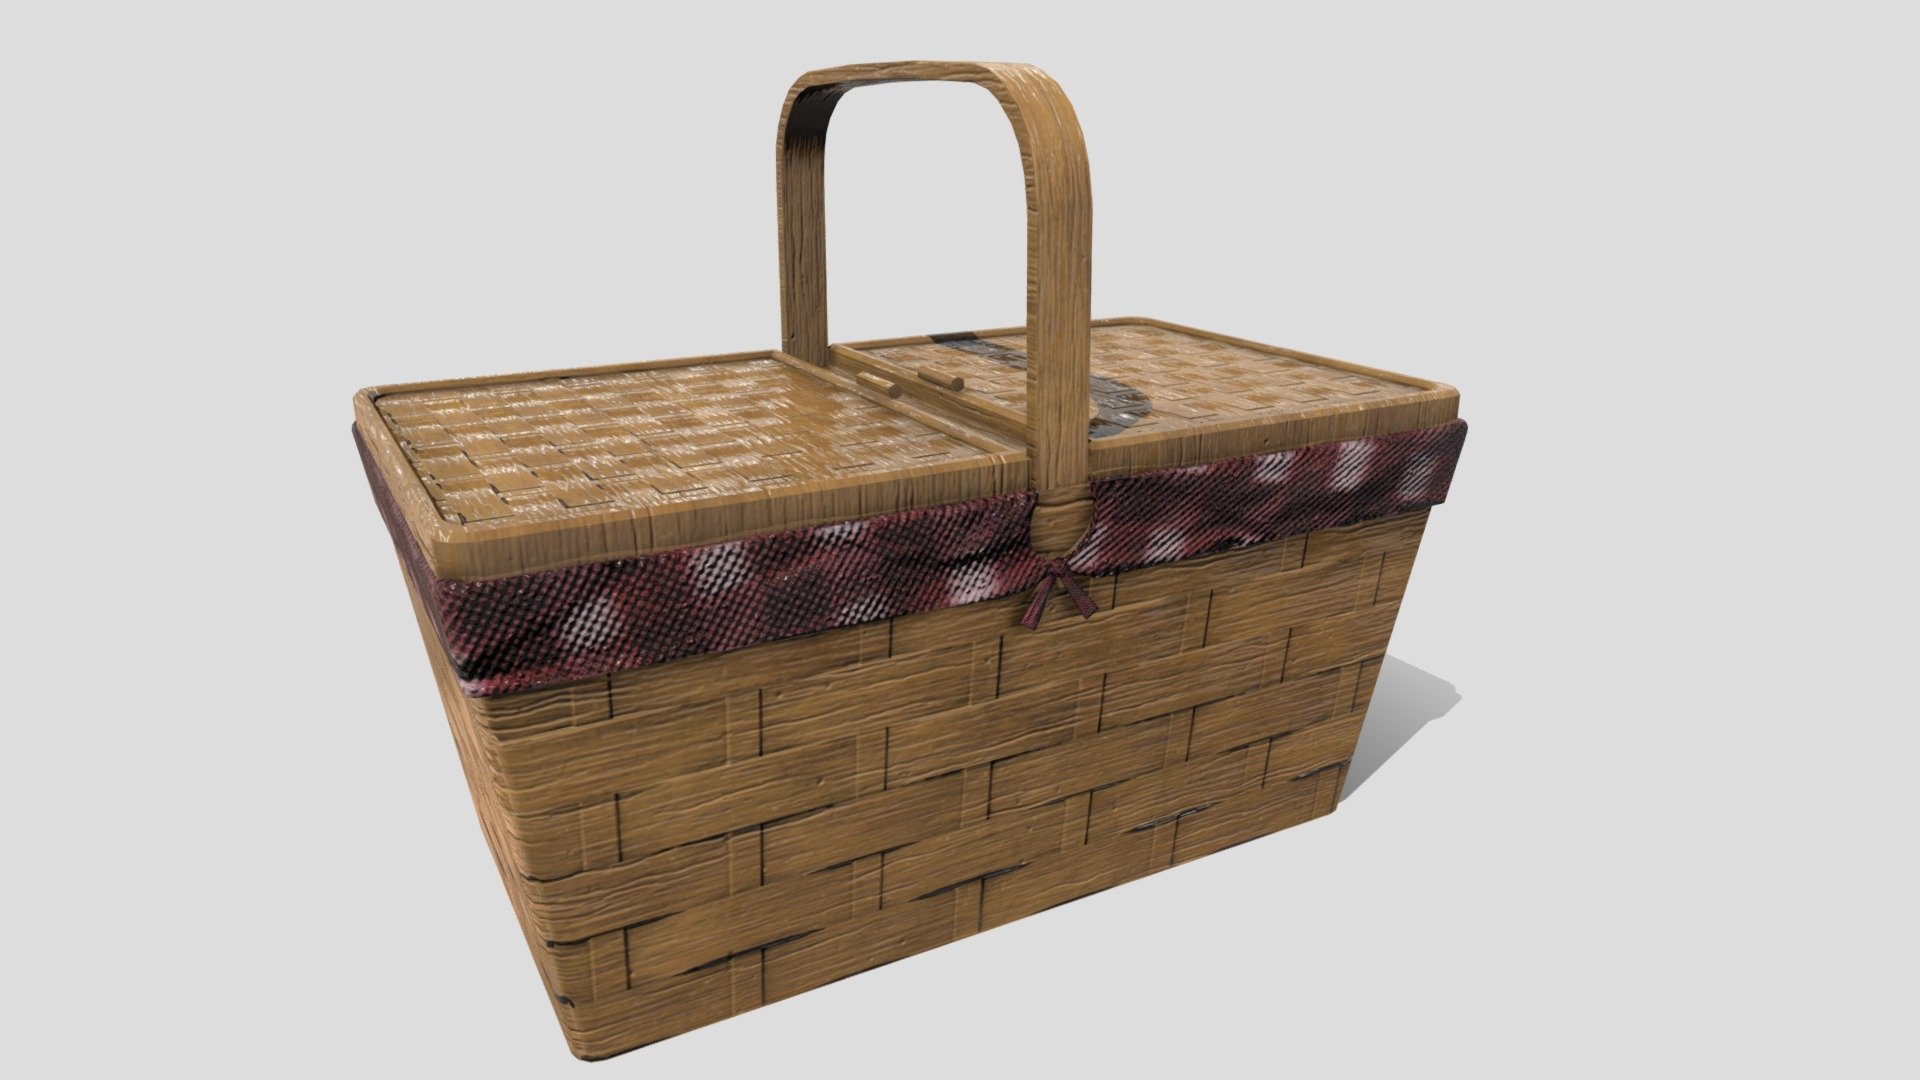 Low poly picnic basket, made with Autodesk Maya and textured with Substance Painter - Picnic Basket - 3D model by Olívia Teixeira (@oliviateixeiracs) 3d model